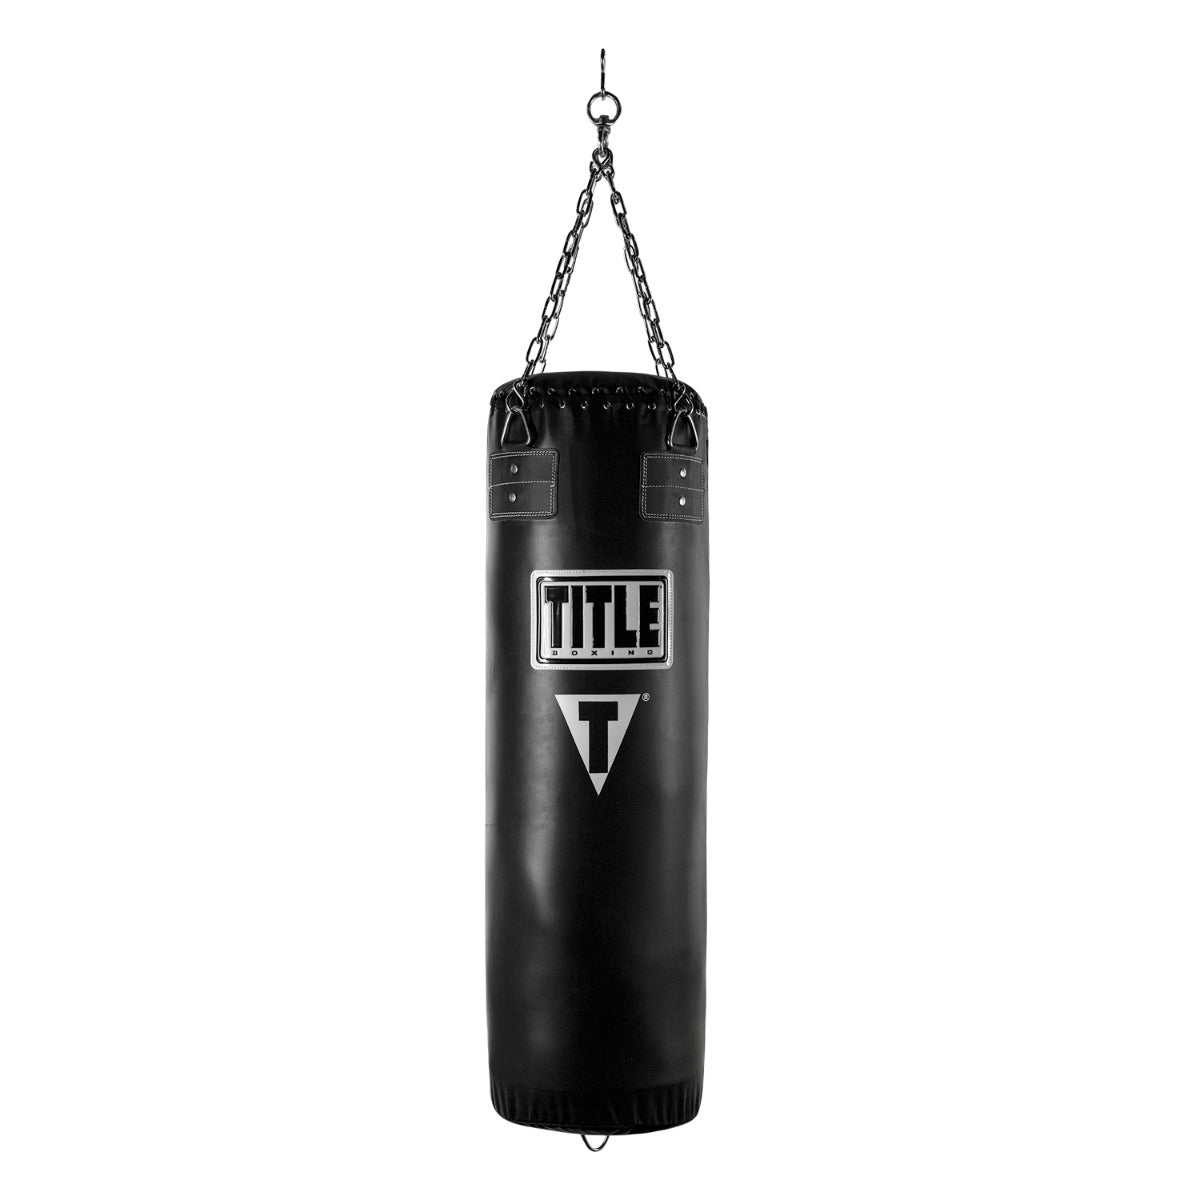 TITLE Synthetic Leather Heavy Bag